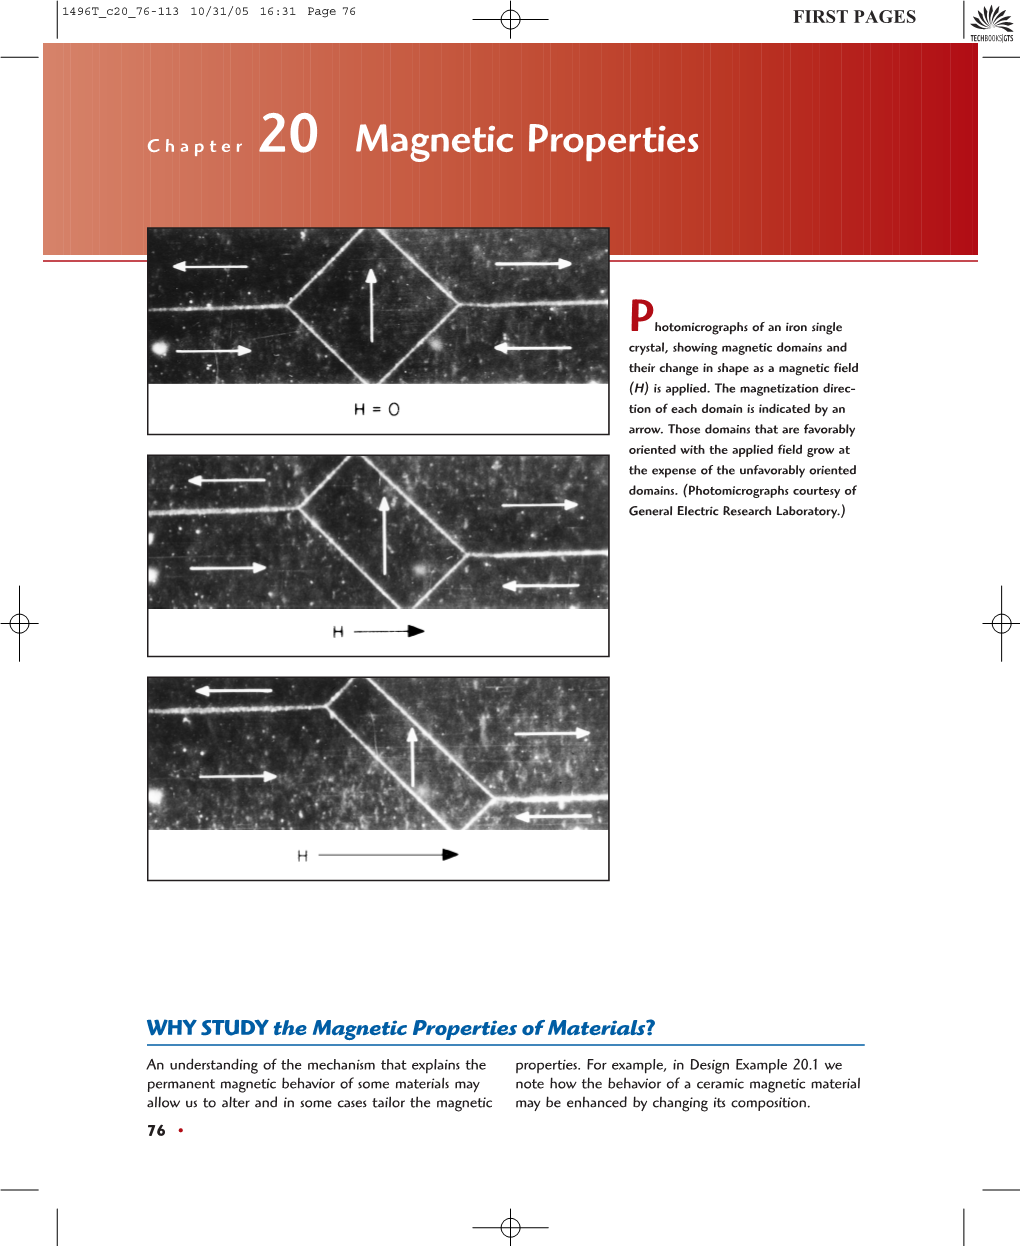 Chapter 20 Magnetic Properties